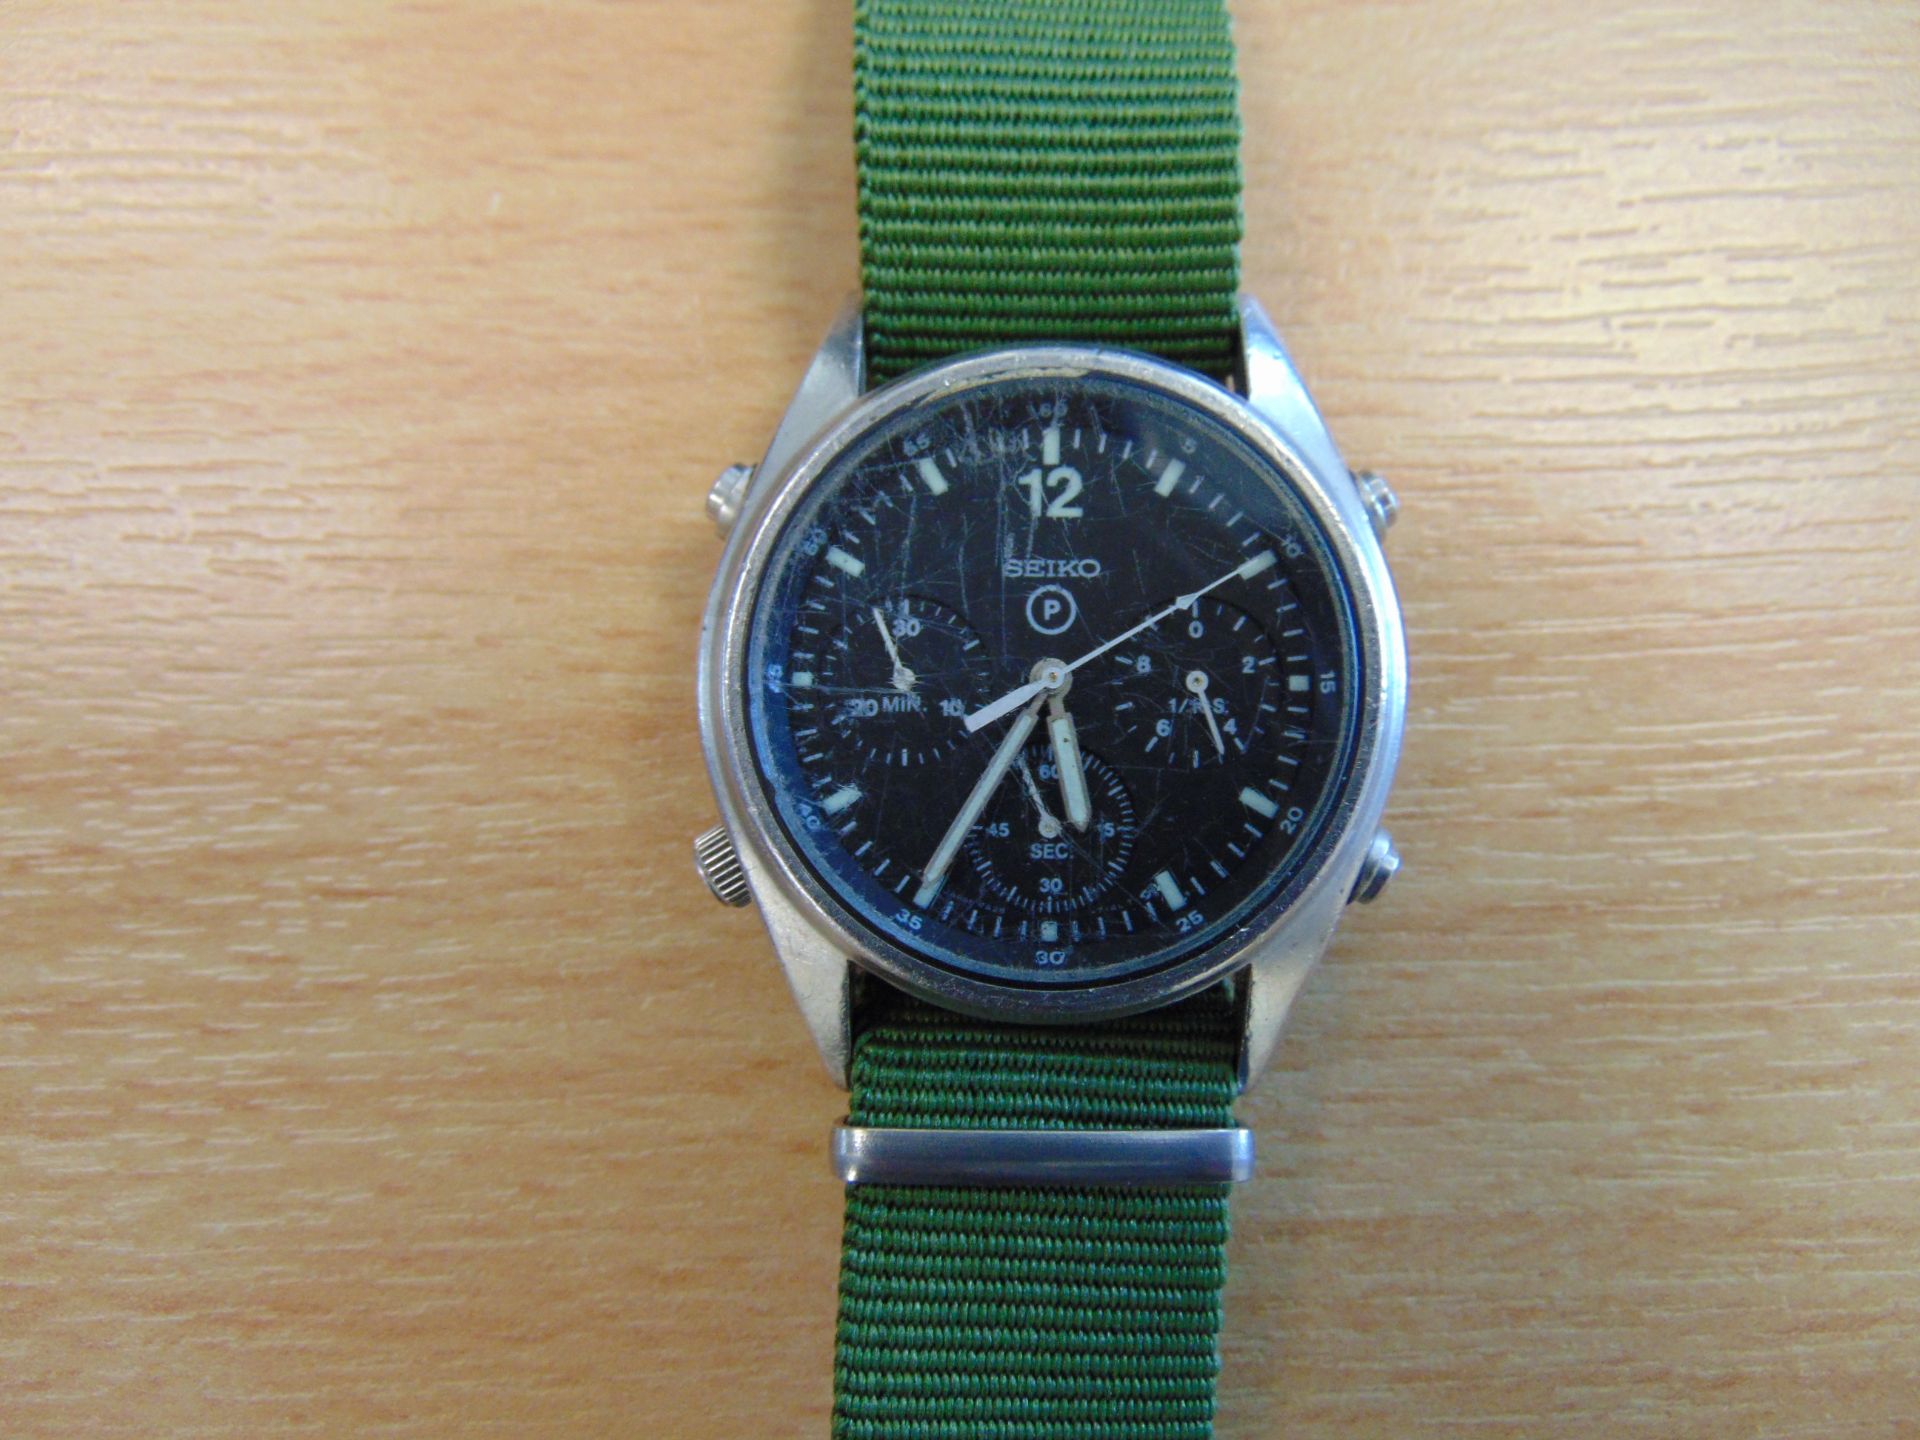 SEIKO Gen 1 Pilots Chrono RAF Harrier Force Issue Nato Marks, Date 1984 - Image 2 of 6